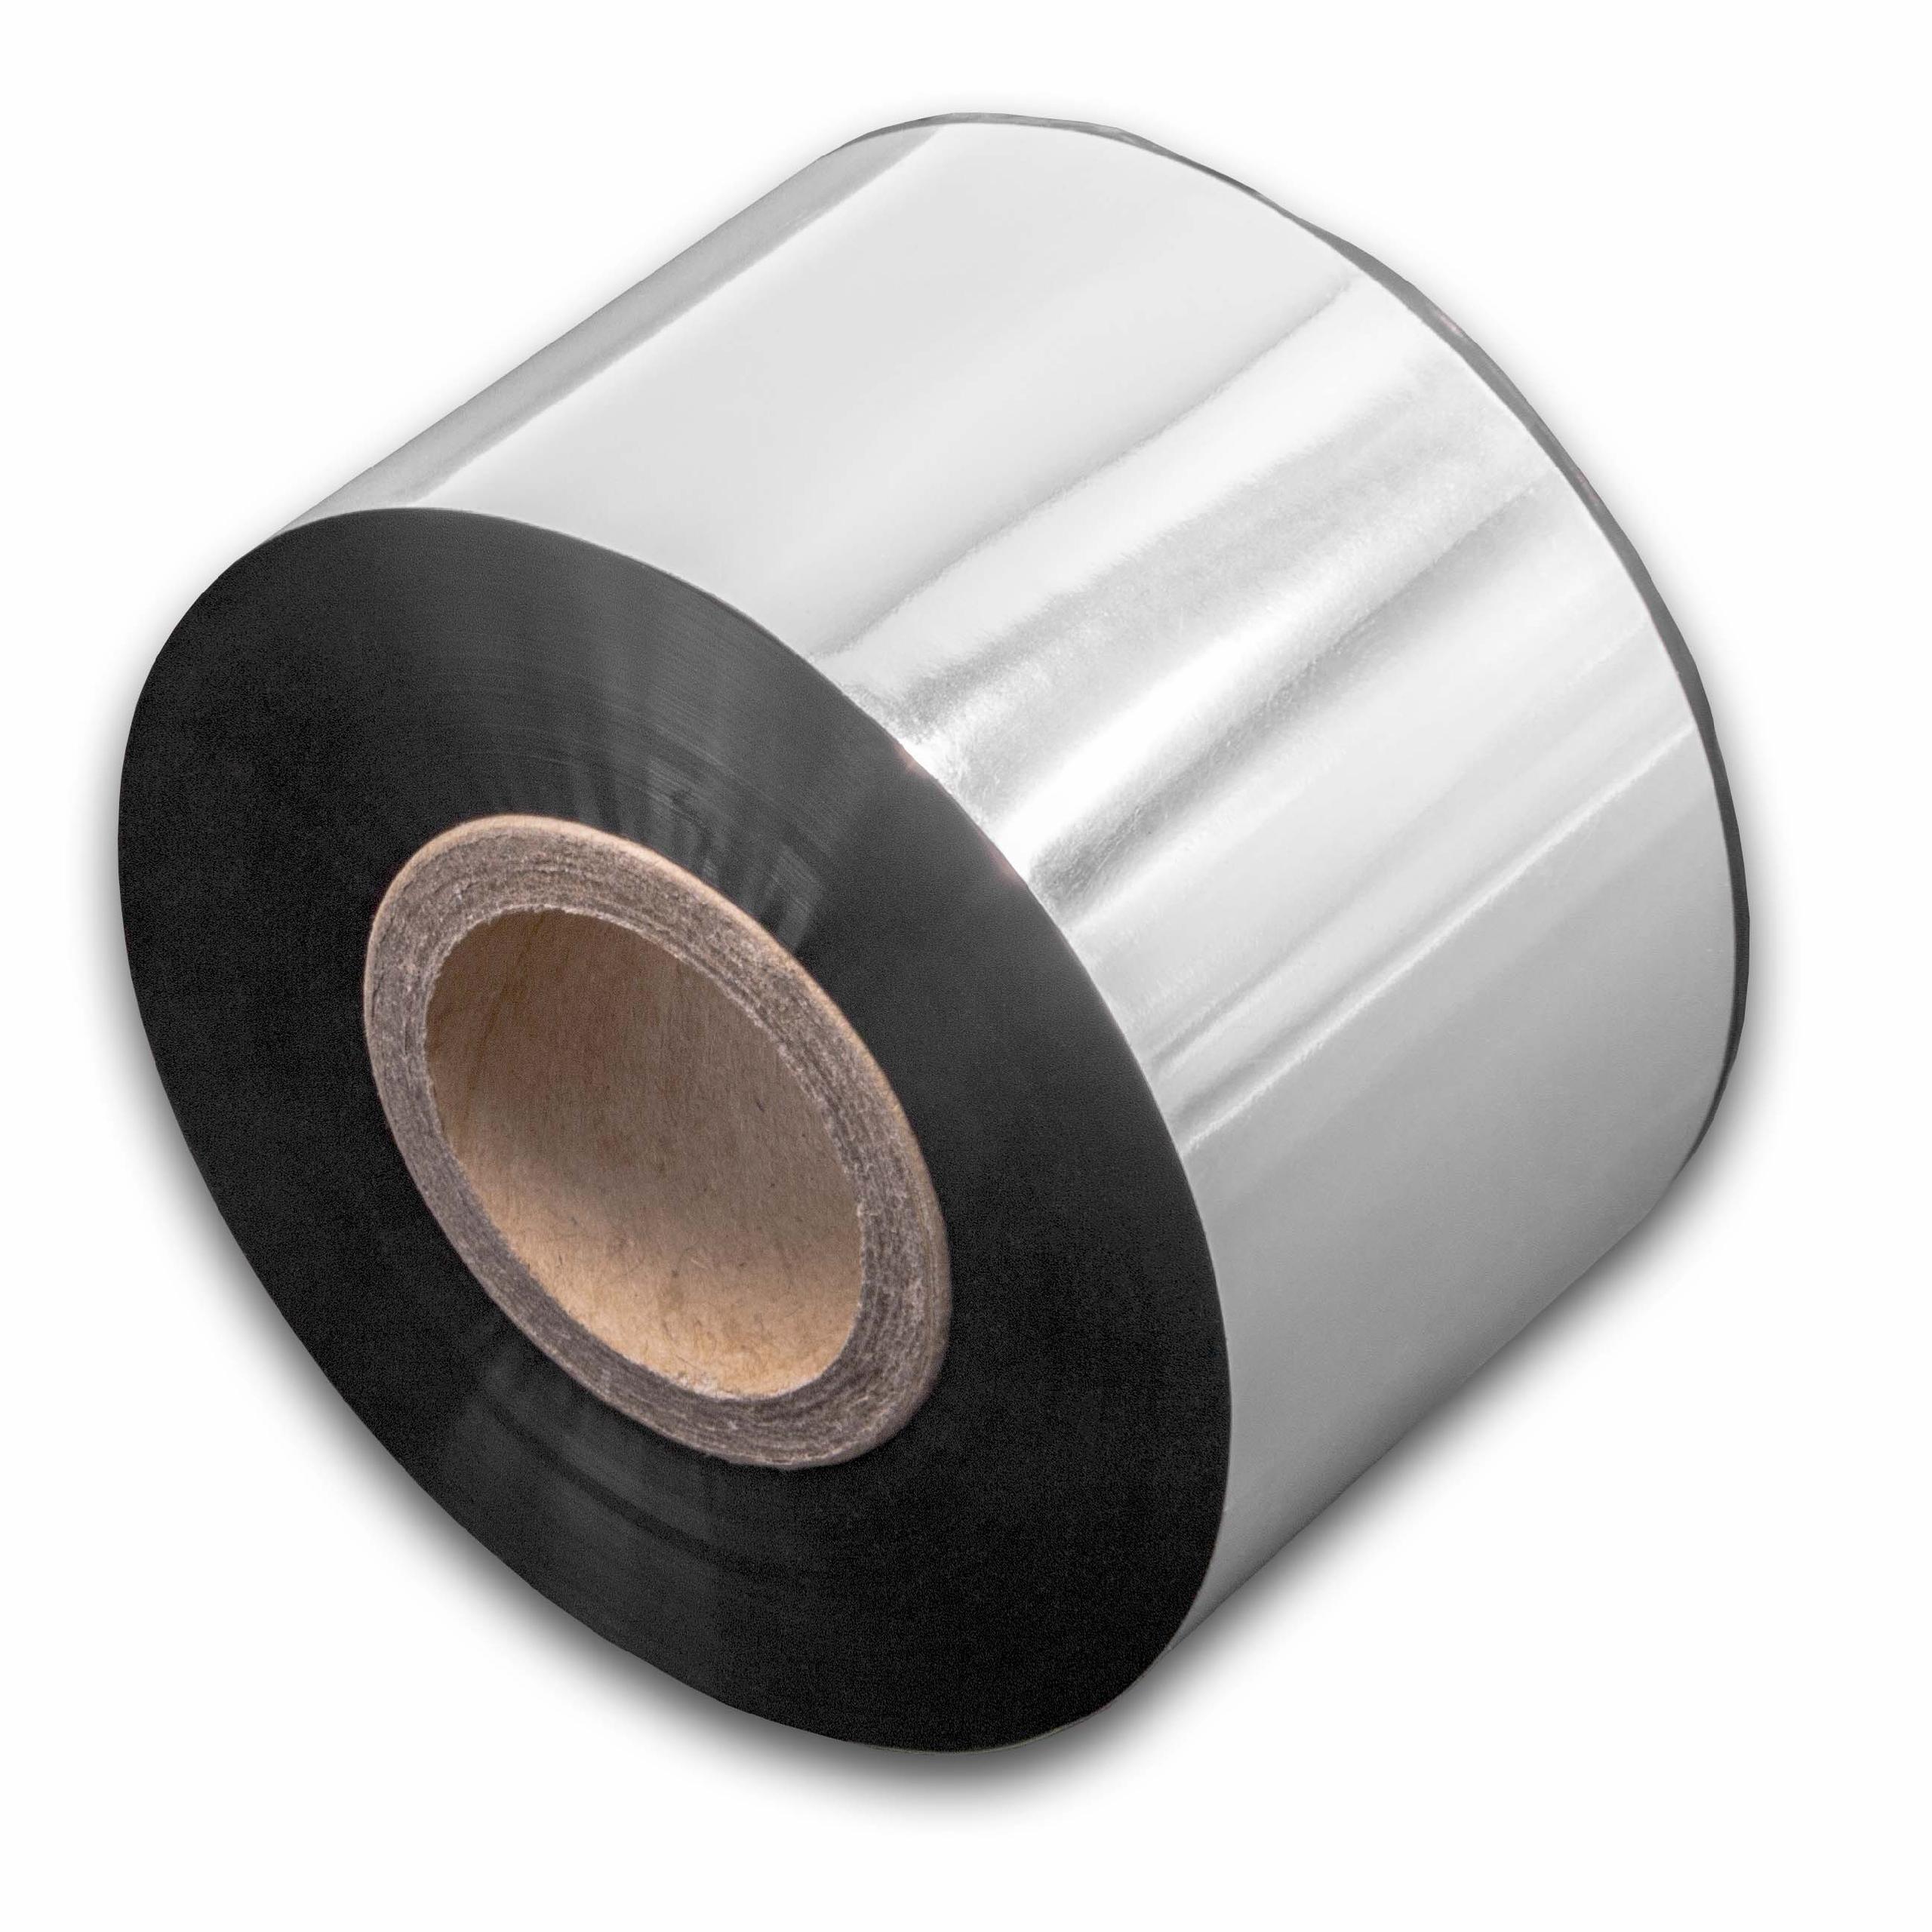 Thermal Transfer Ribbon suitable for 9906 Avery DennisonPrinter etc - 40 mm x 300 m, Wax Resin